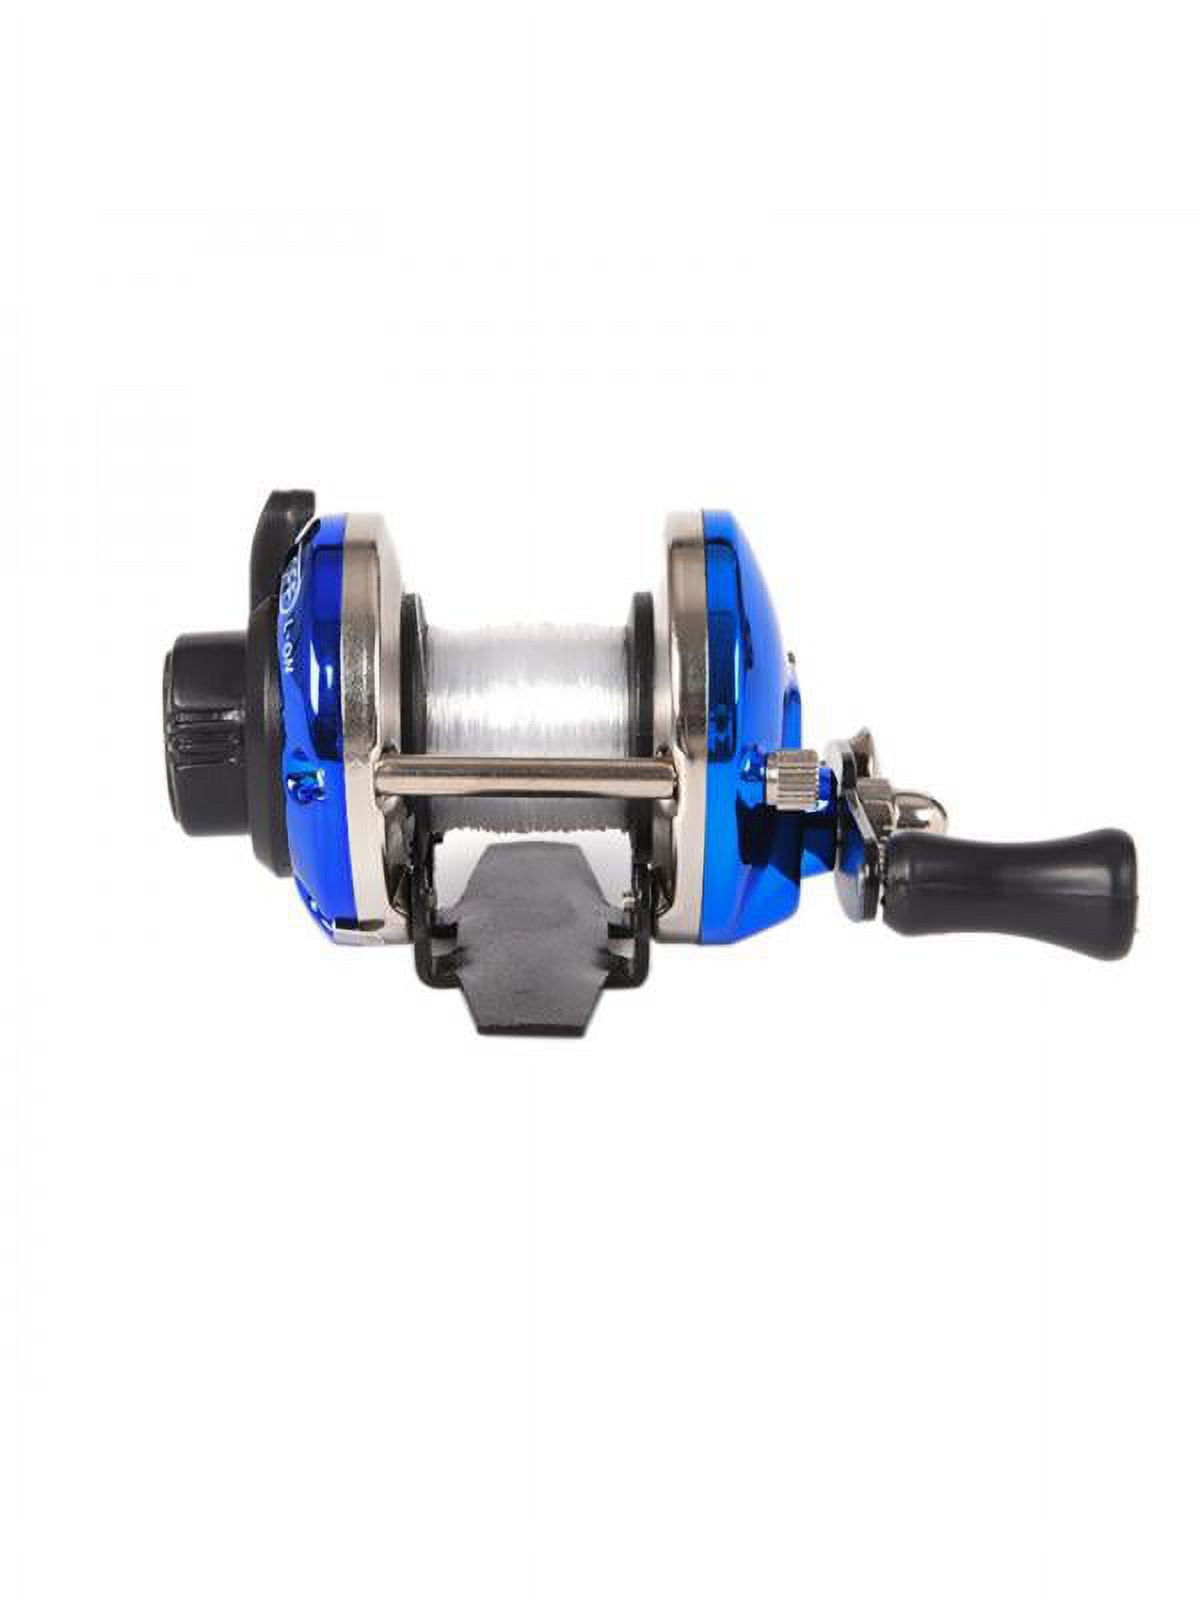 Buy Small Raincoat All Metal Drum Fishing Baitcasting Reel Left/Right Hand  5.2:1 7Bb Metal Round Jigging Reel Fishing Reel Boat Wheel,Right Hand  Online at Low Prices in India 